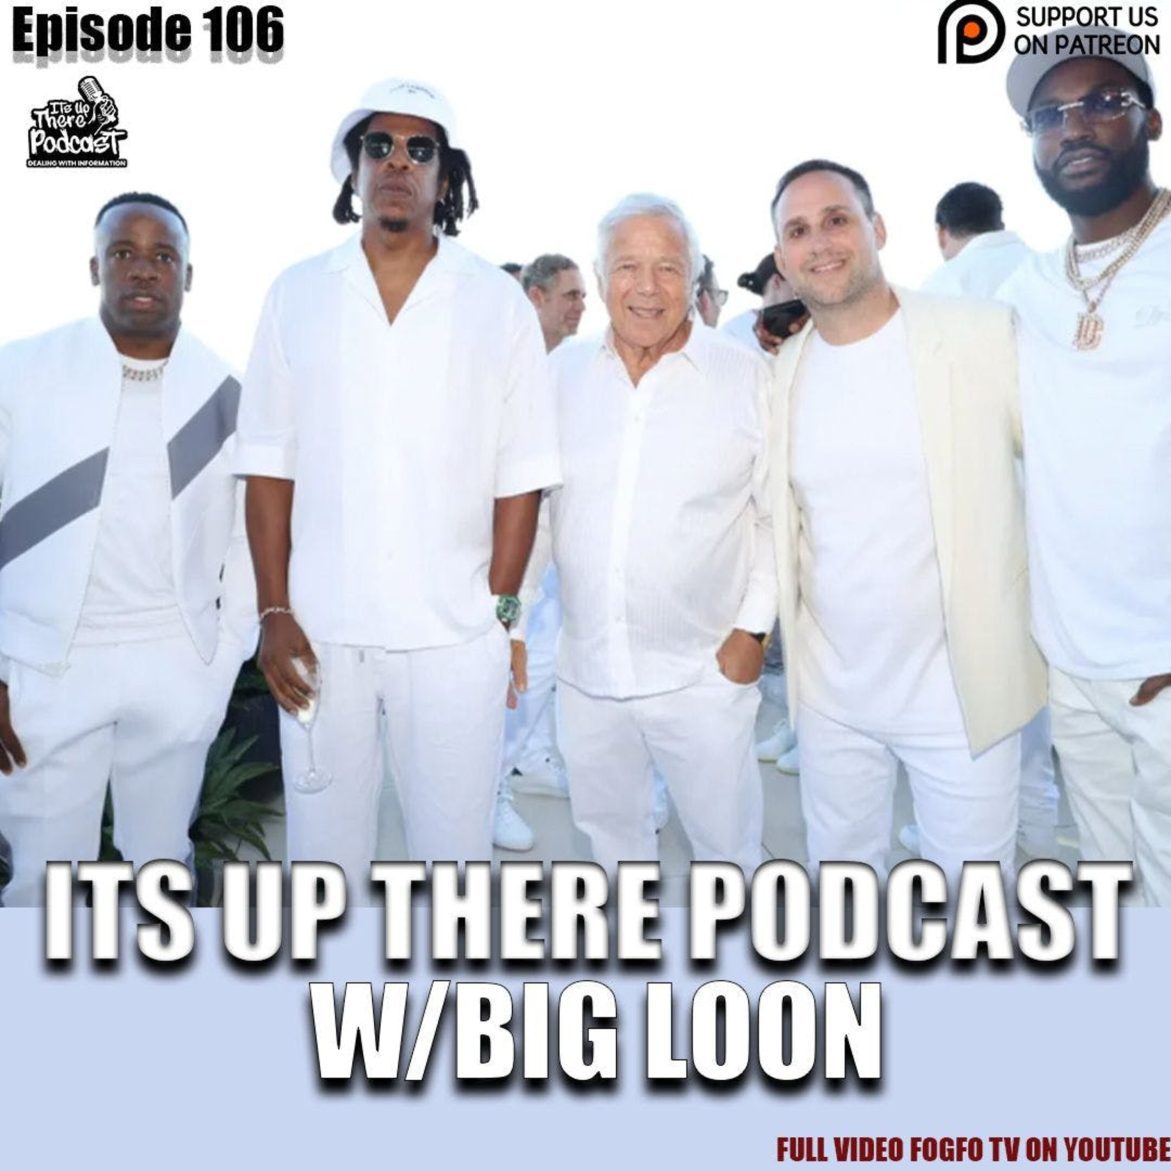 Black Podcasting - #106| “EVERYBODY IN THE CROWD AINT THE AUDIENCE | RAPPERS PARTYING WITH BILLIONAIRES |INFATUATION WITH WHITE RAPPERS | EVERYBODY IN THE CULTURE DON'T SPEAK THE LANGUAGE